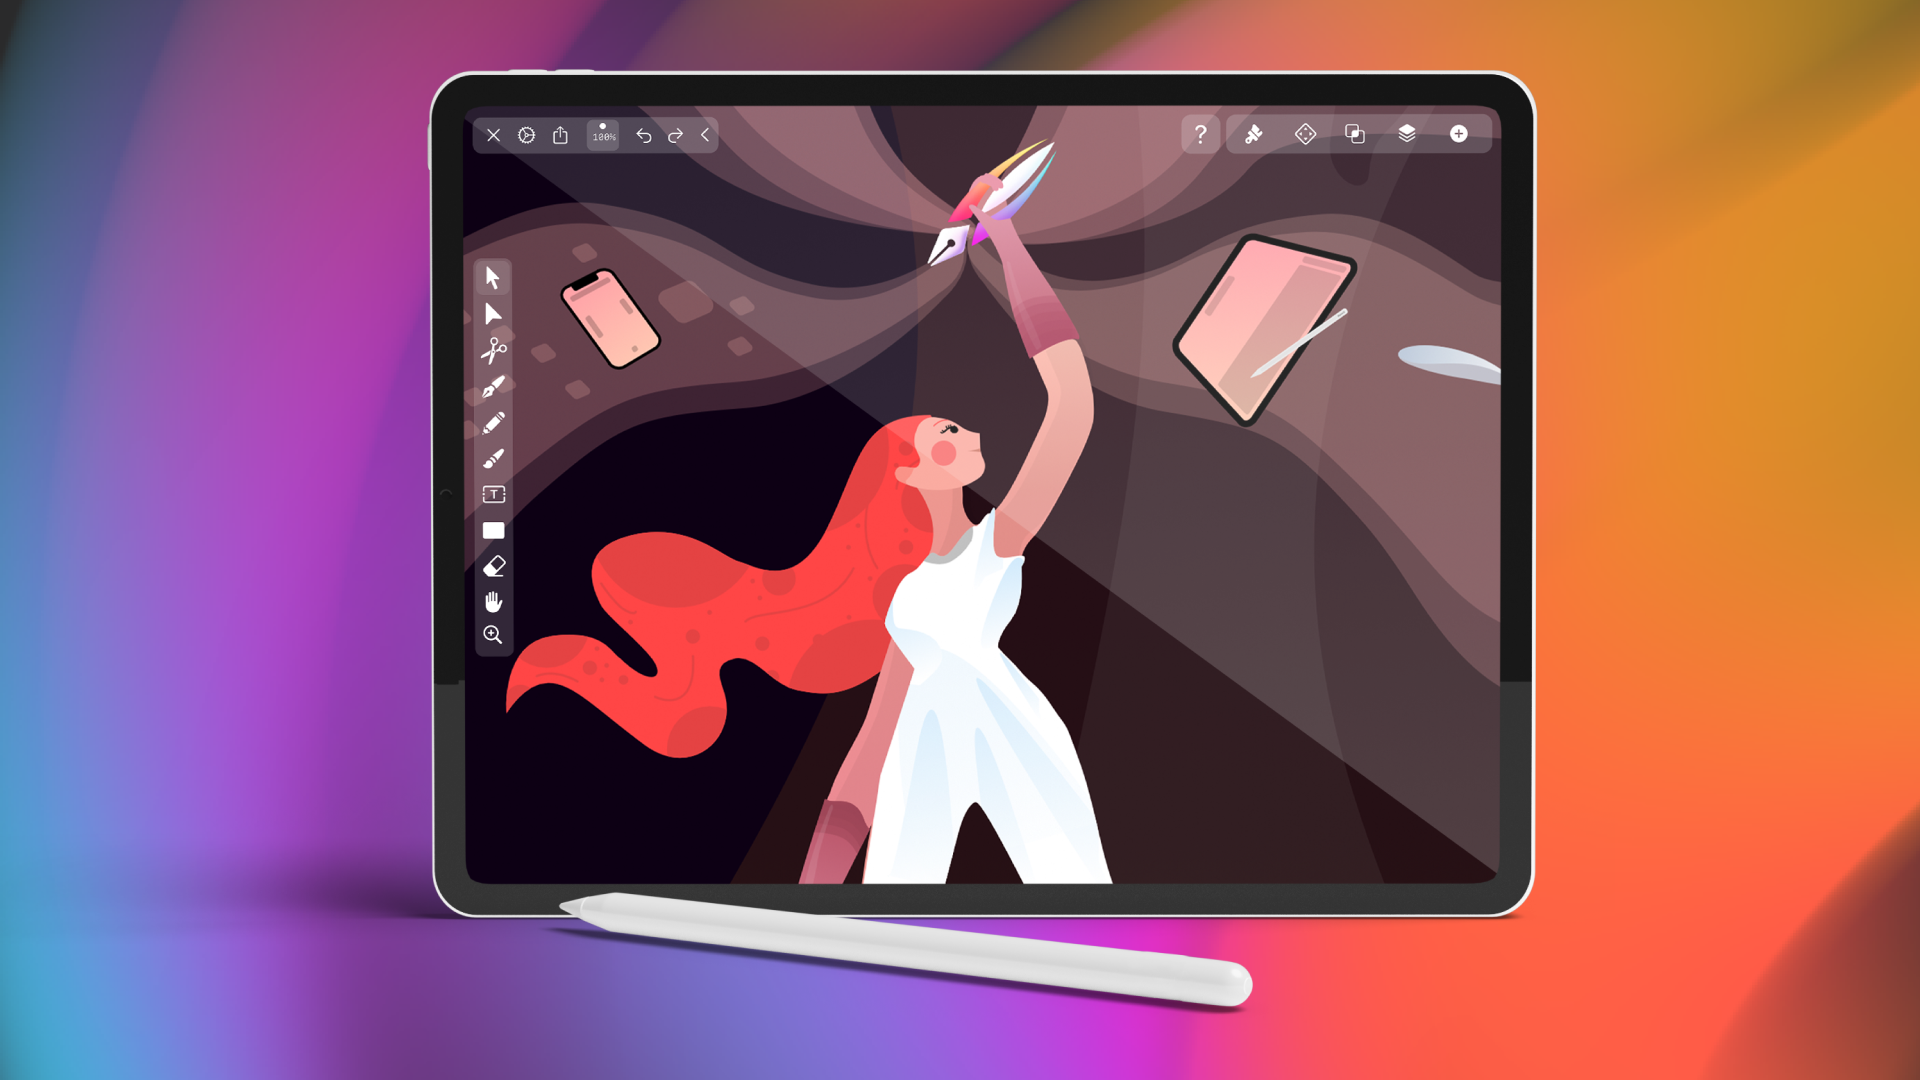 iPad screen showing artwork of a woman holding a pen